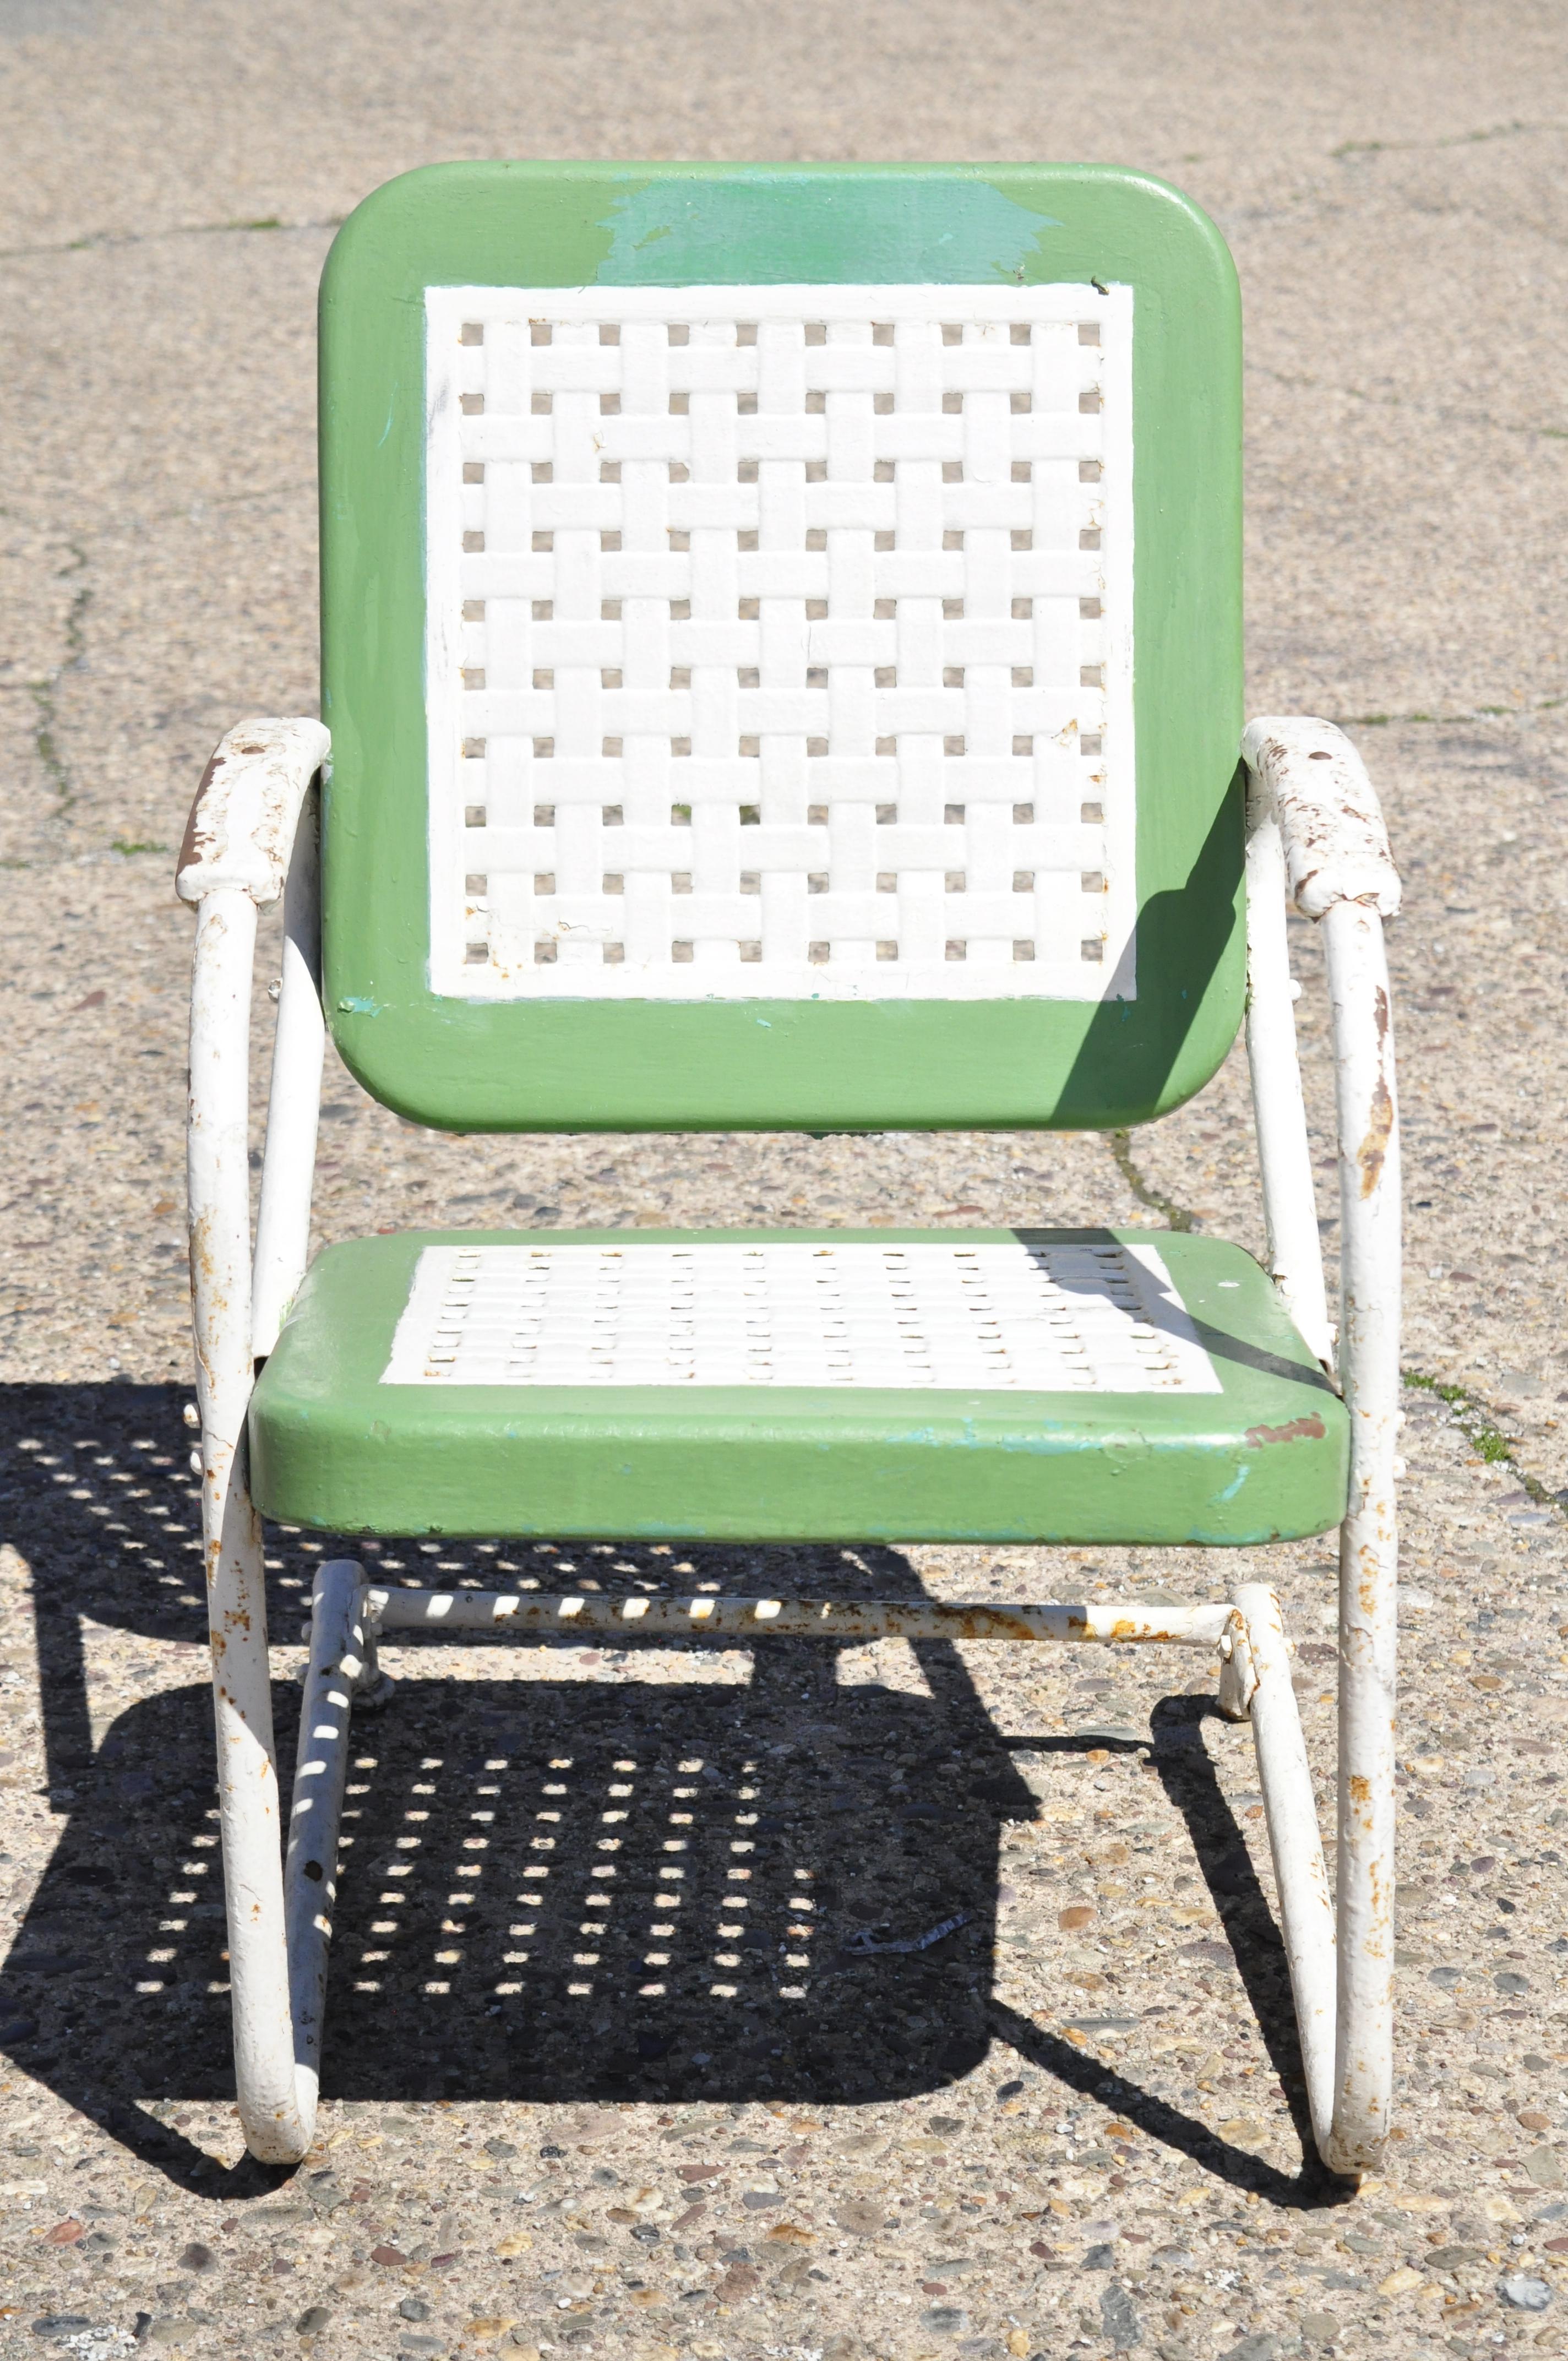 Vintage Art Deco metal basketweave old green white porch outdoor spring arm chair. Item features original green and white painted finish, woven basket weave seat and back, metal frame, very nice antique chairs, quality American craftsmanship, great